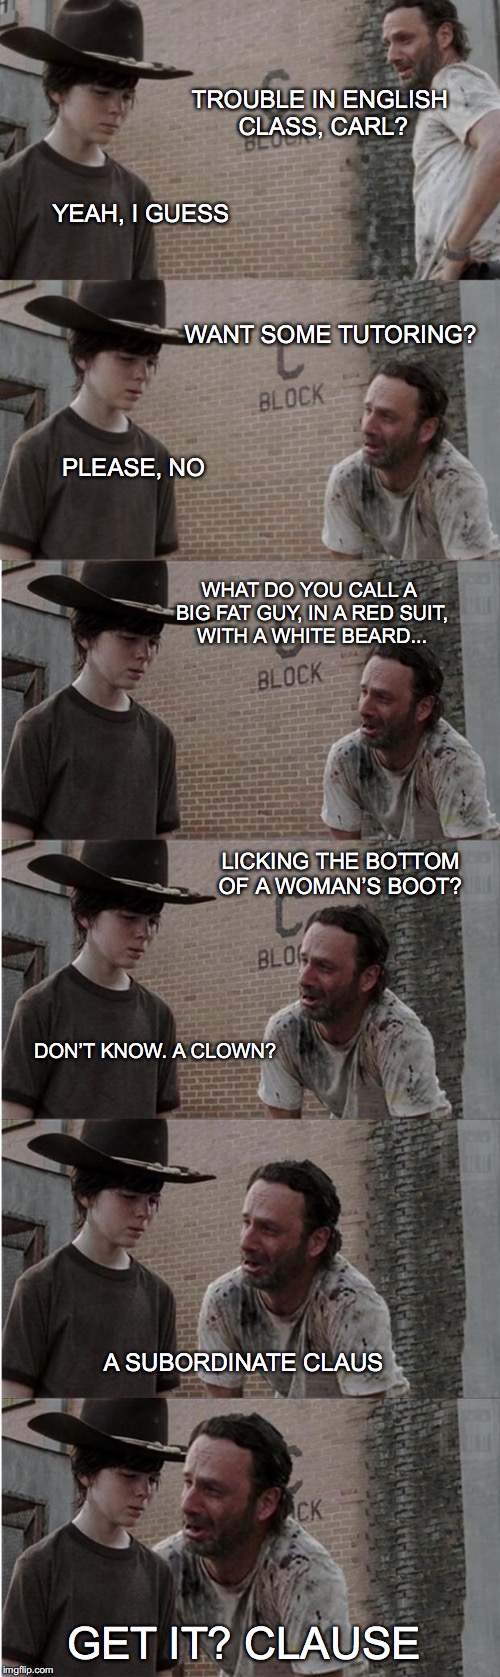 Rick and Carl Longer Meme | TROUBLE IN ENGLISH CLASS, CARL? YEAH, I GUESS; WANT SOME TUTORING? PLEASE, NO; WHAT DO YOU CALL A BIG FAT GUY, IN A RED SUIT, WITH A WHITE BEARD... LICKING THE BOTTOM OF A WOMAN’S BOOT? DON’T KNOW. A CLOWN? A SUBORDINATE CLAUS; GET IT? CLAUSE | image tagged in memes,rick and carl longer,free education | made w/ Imgflip meme maker